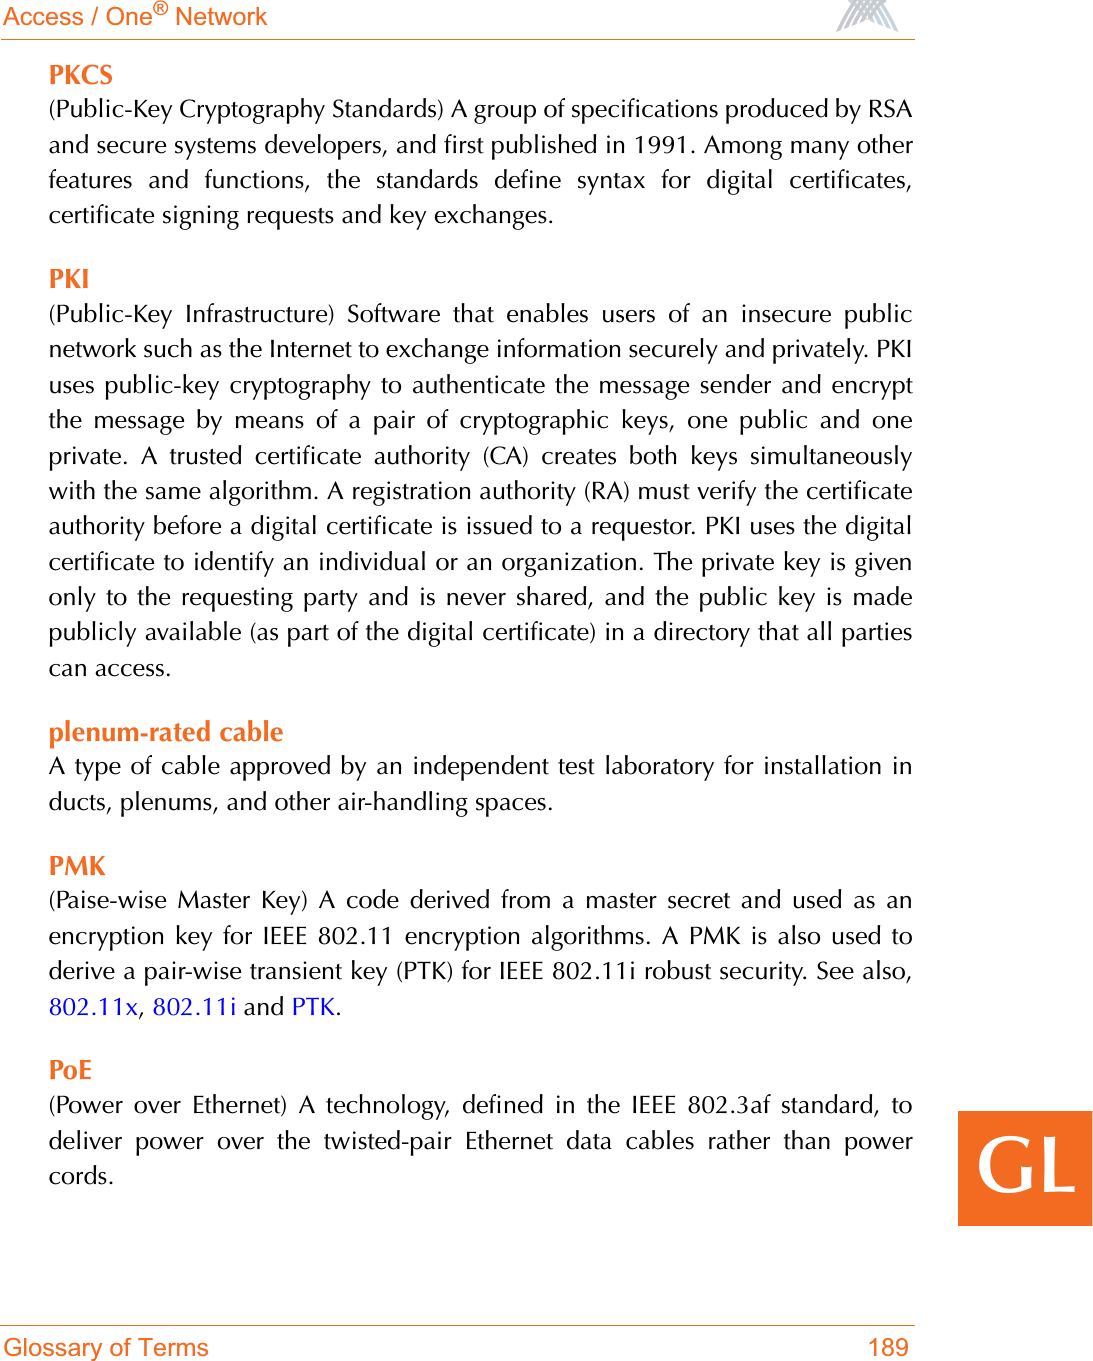 Access / One® NetworkGlossary of Terms 189GLPKCS(Public-Key Cryptography Standards) A group of specifications produced by RSAand secure systems developers, and first published in 1991. Among many otherfeatures and functions, the standards define syntax for digital certificates,certificate signing requests and key exchanges.PKI(Public-Key Infrastructure) Software that enables users of an insecure publicnetwork such as the Internet to exchange information securely and privately. PKIuses public-key cryptography to authenticate the message sender and encryptthe message by means of a pair of cryptographic keys, one public and oneprivate. A trusted certificate authority (CA) creates both keys simultaneouslywith the same algorithm. A registration authority (RA) must verify the certificateauthority before a digital certificate is issued to a requestor. PKI uses the digitalcertificate to identify an individual or an organization. The private key is givenonly to the requesting party and is never shared, and the public key is madepublicly available (as part of the digital certificate) in a directory that all partiescan access.plenum-rated cableA type of cable approved by an independent test laboratory for installation inducts, plenums, and other air-handling spaces.PMK(Paise-wise Master Key) A code derived from a master secret and used as anencryption key for IEEE 802.11 encryption algorithms. A PMK is also used toderive a pair-wise transient key (PTK) for IEEE 802.11i robust security. See also,802.11x,802.11i and PTK.PoE(Power over Ethernet) A technology, defined in the IEEE 802.3af standard, todeliver power over the twisted-pair Ethernet data cables rather than powercords.